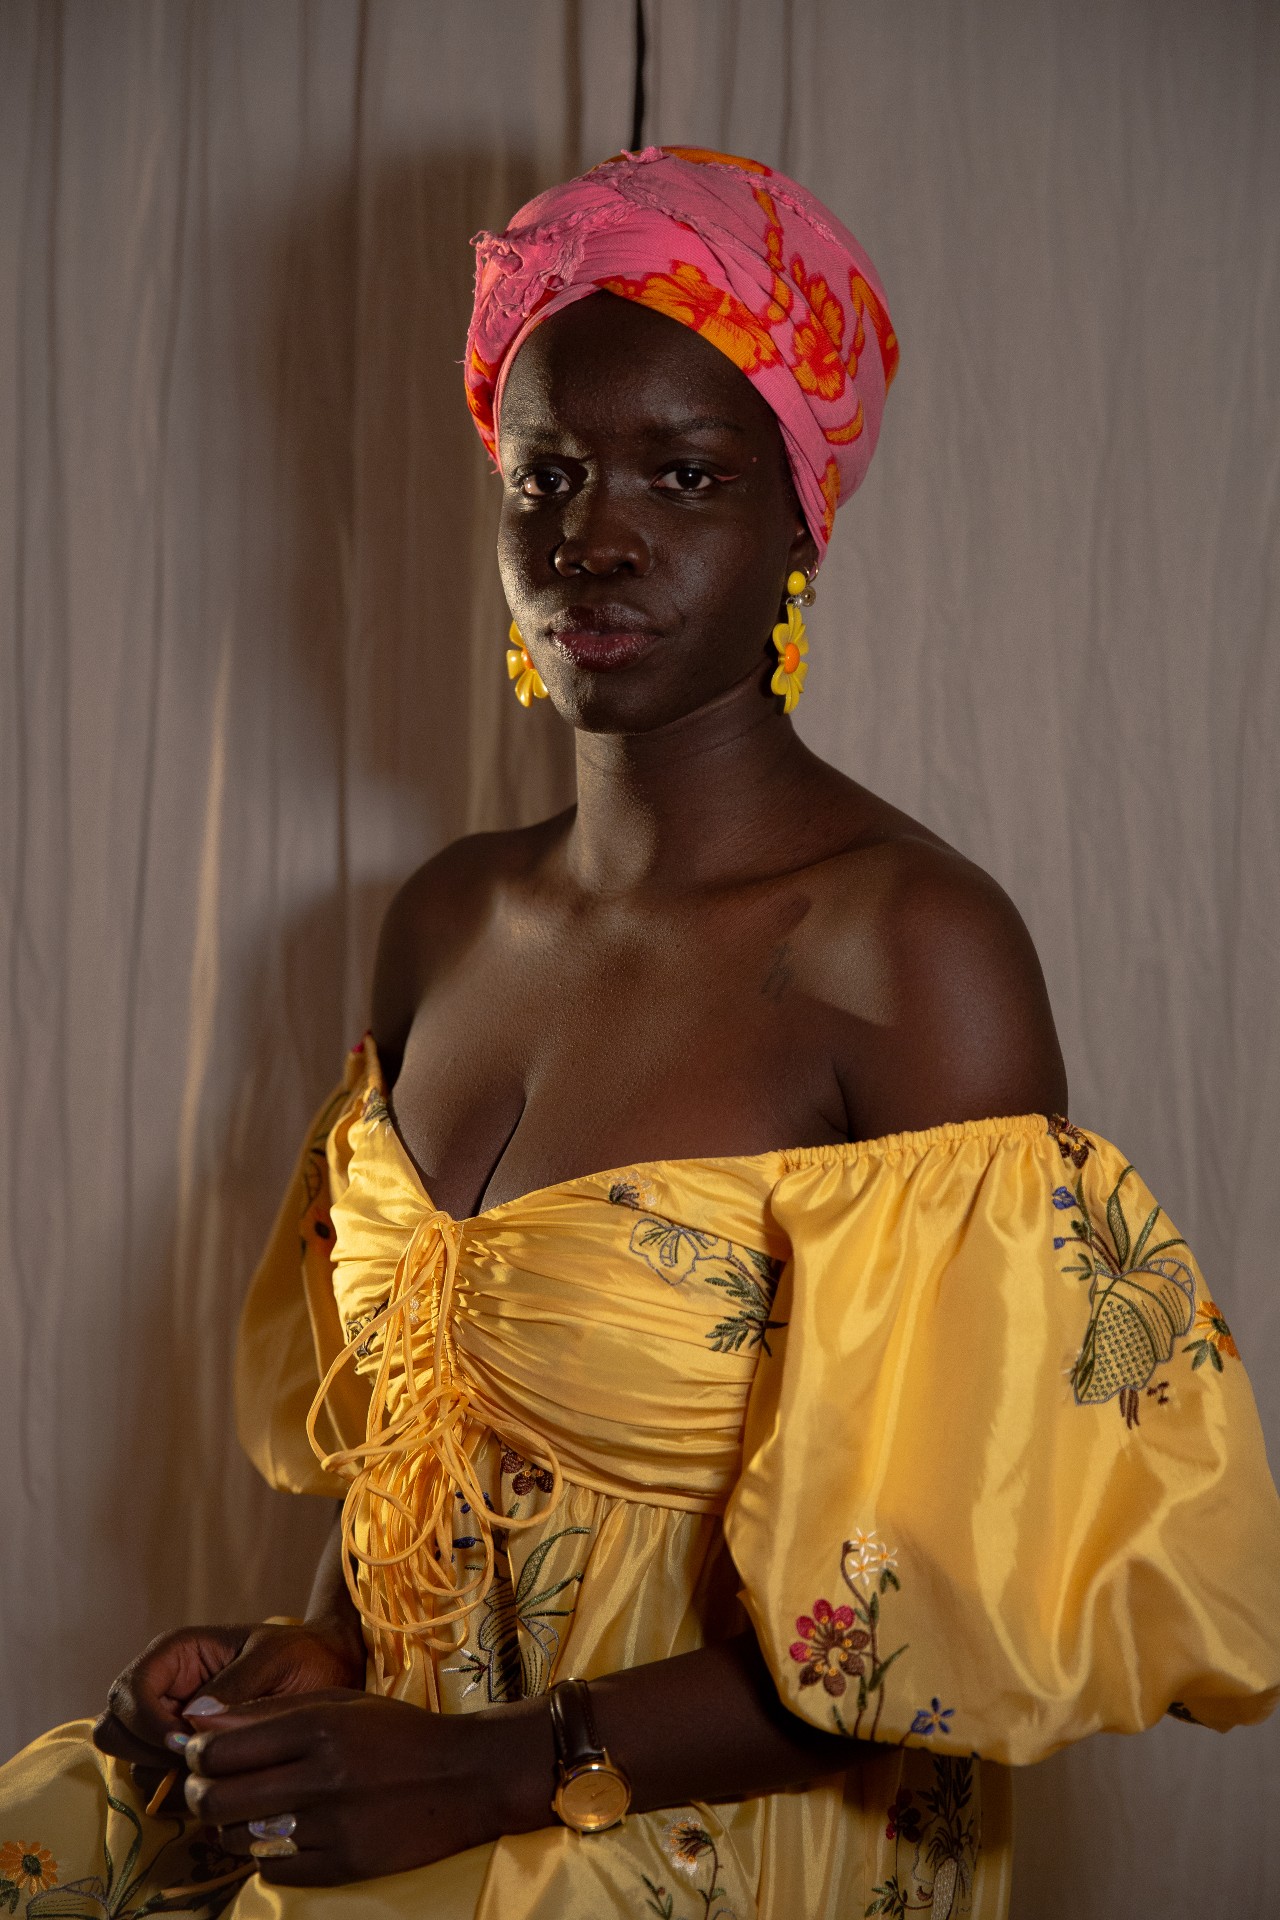 A 20-something African woman poses formally, her back straight, wearing a yellow dress and pink turban, her hands in her lap